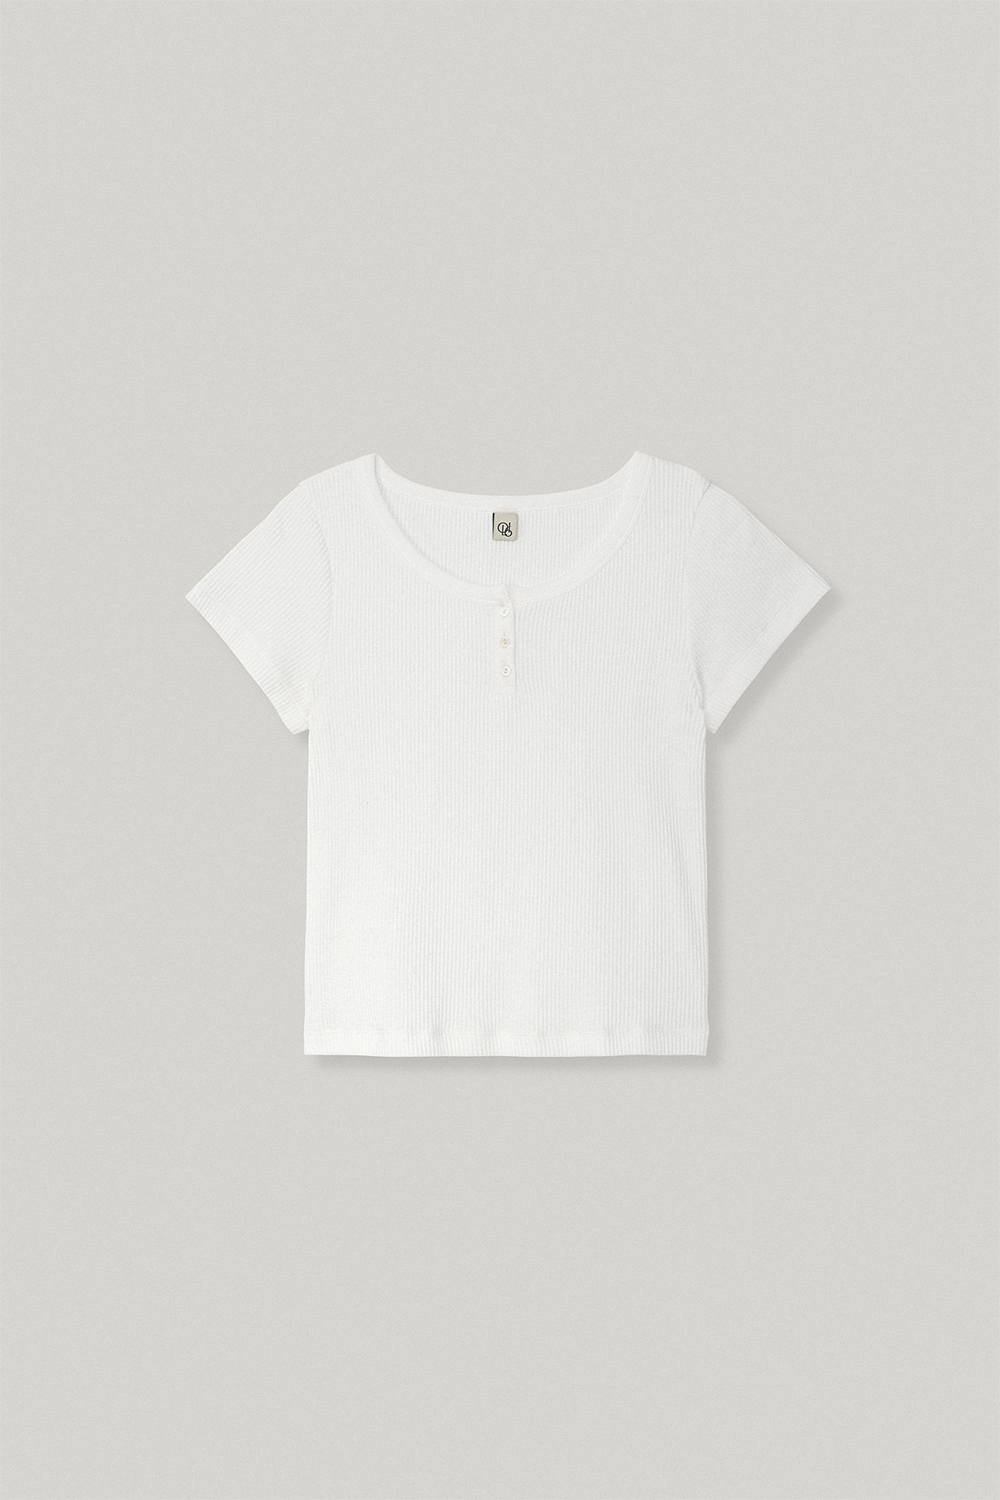 [4 REORDER] Lis Button Top in White